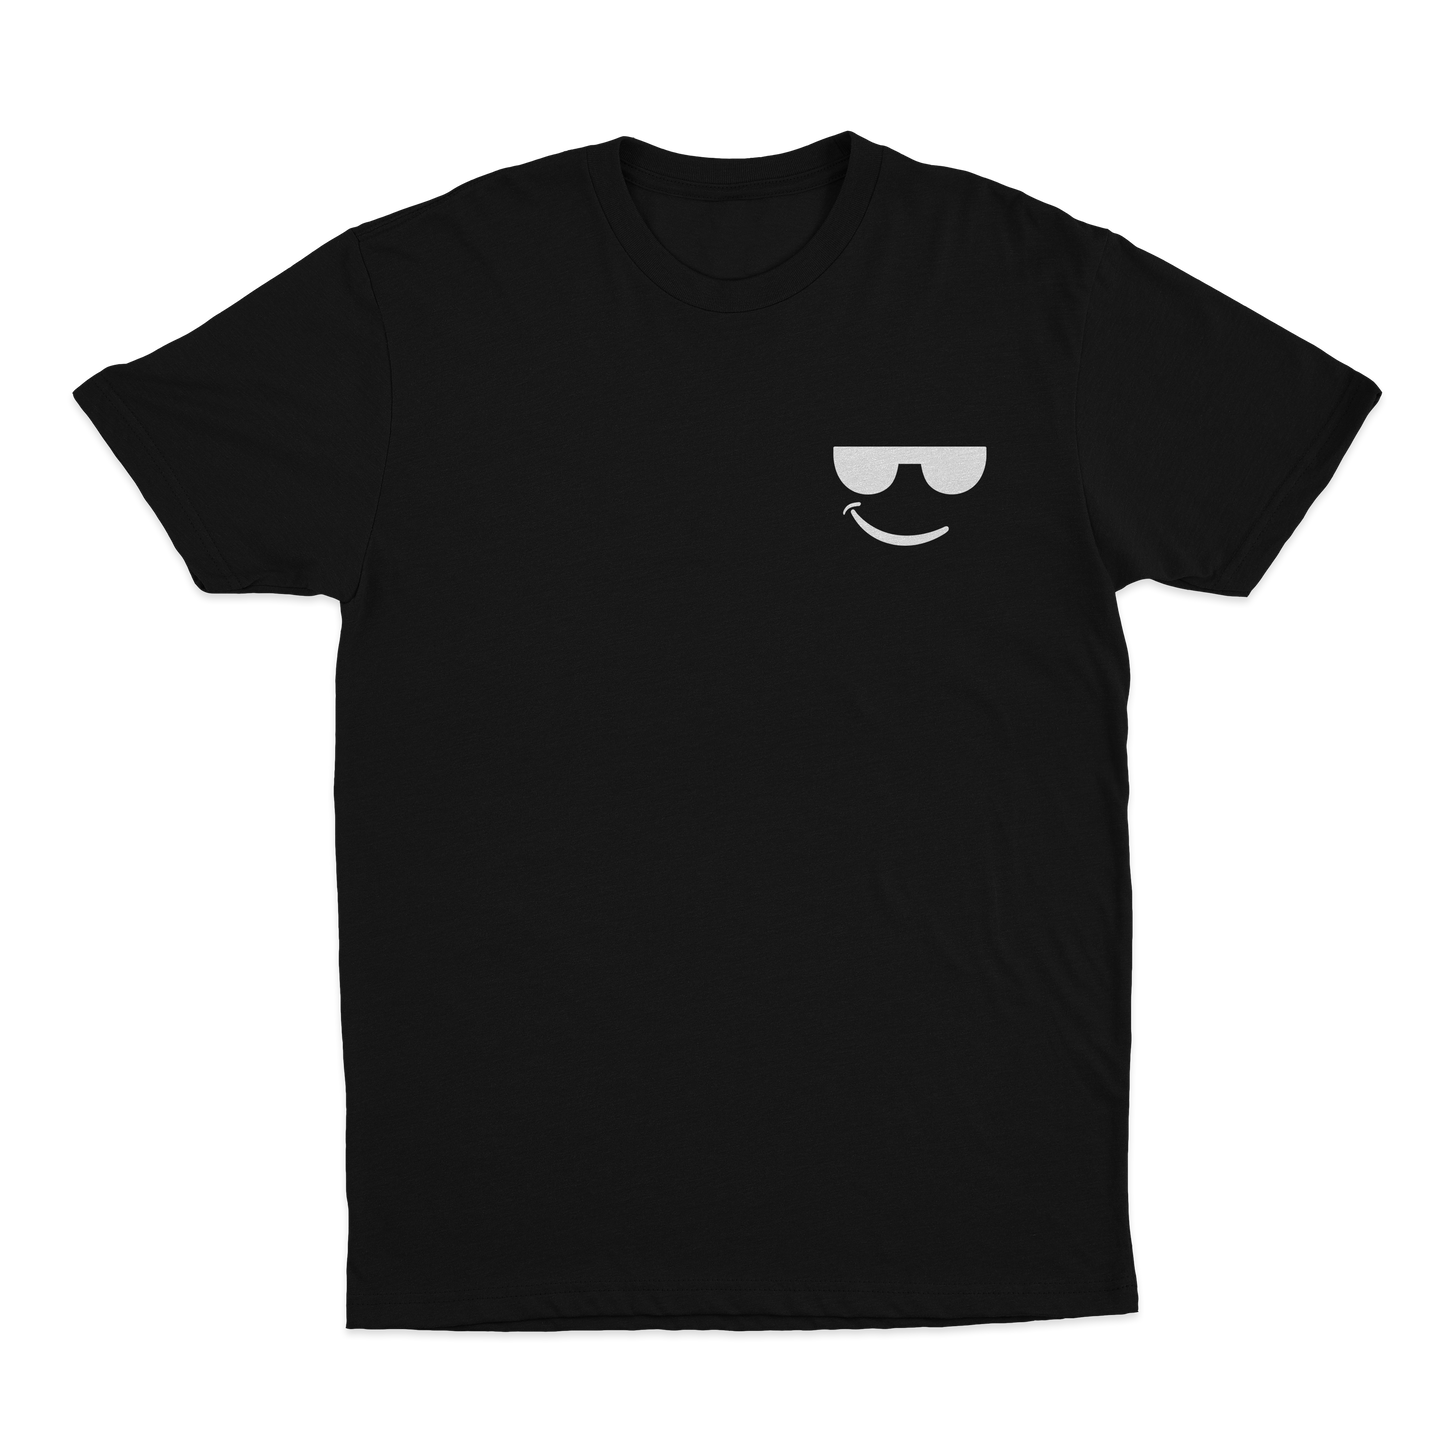 The Astronomers (Smile) Tee